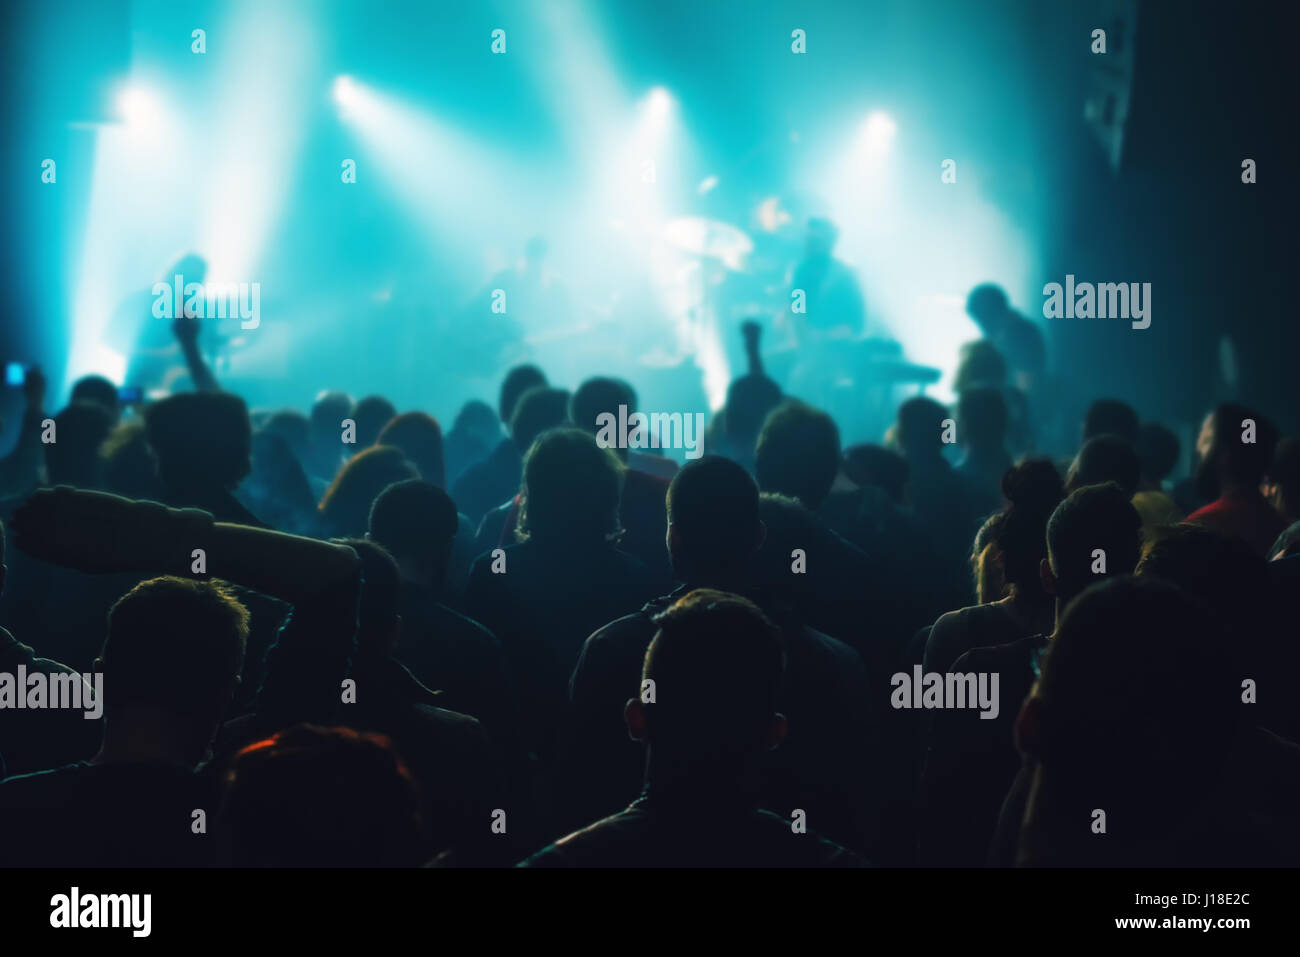 Music concert crowd, people at popular live rock performance, fans hands in the air, selective focus Stock Photo